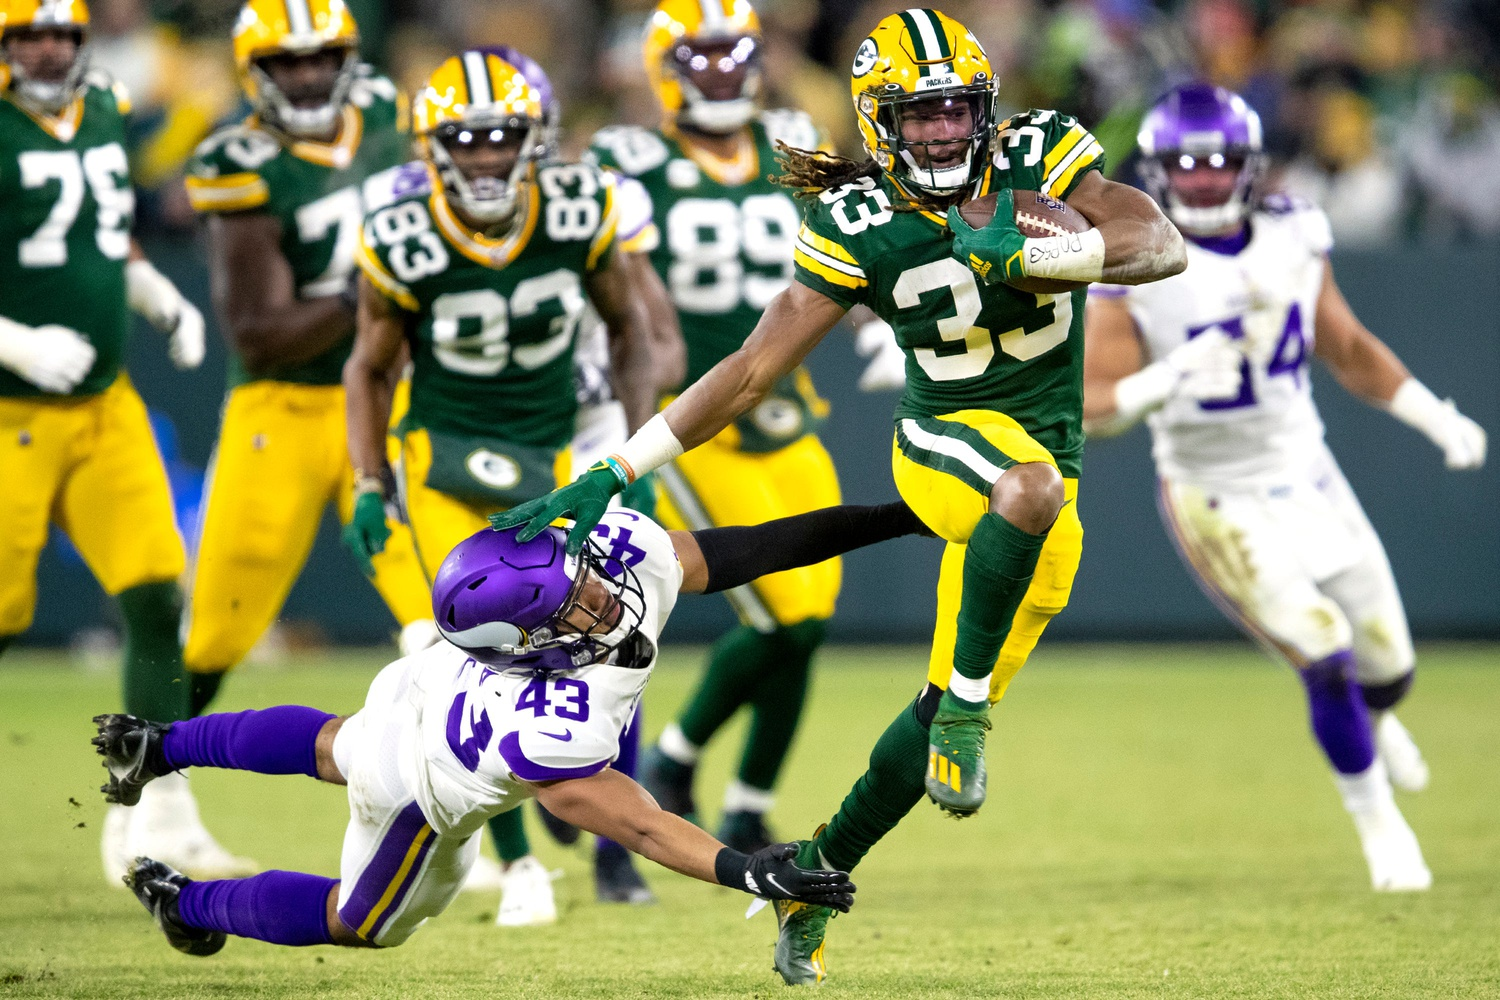 Dusty Evely previews Packers and Vikings